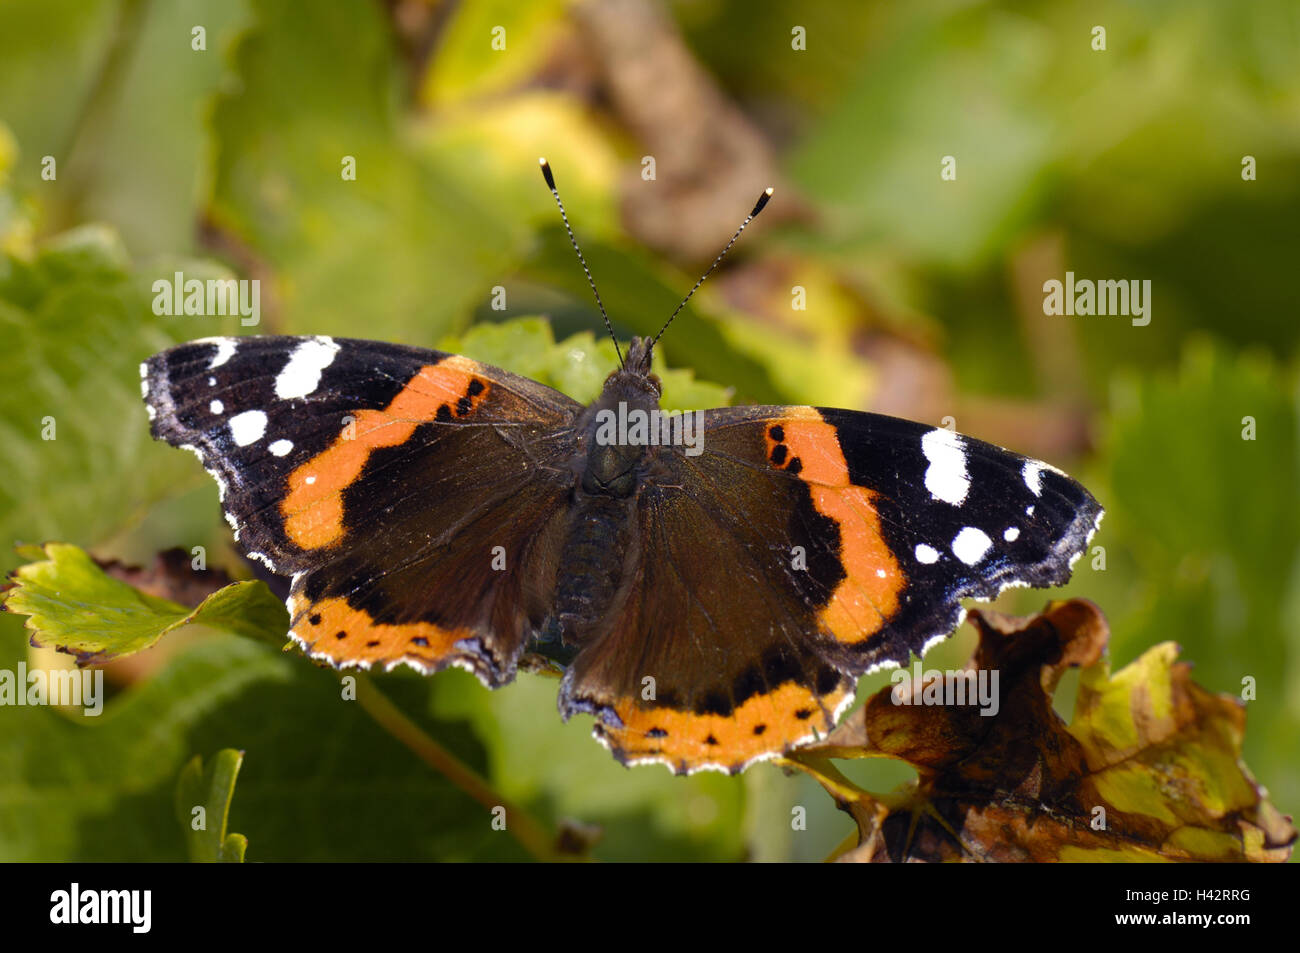 Plant, butterfly, admiral, noble butterfly, butterfly, fauna, wing, insect, insects, nature, Nymphalidae, butterflies, animal, animal kingdom, animal world, butterfly, outside, leaves, grapes, vineyard, grape leaves, Stock Photo